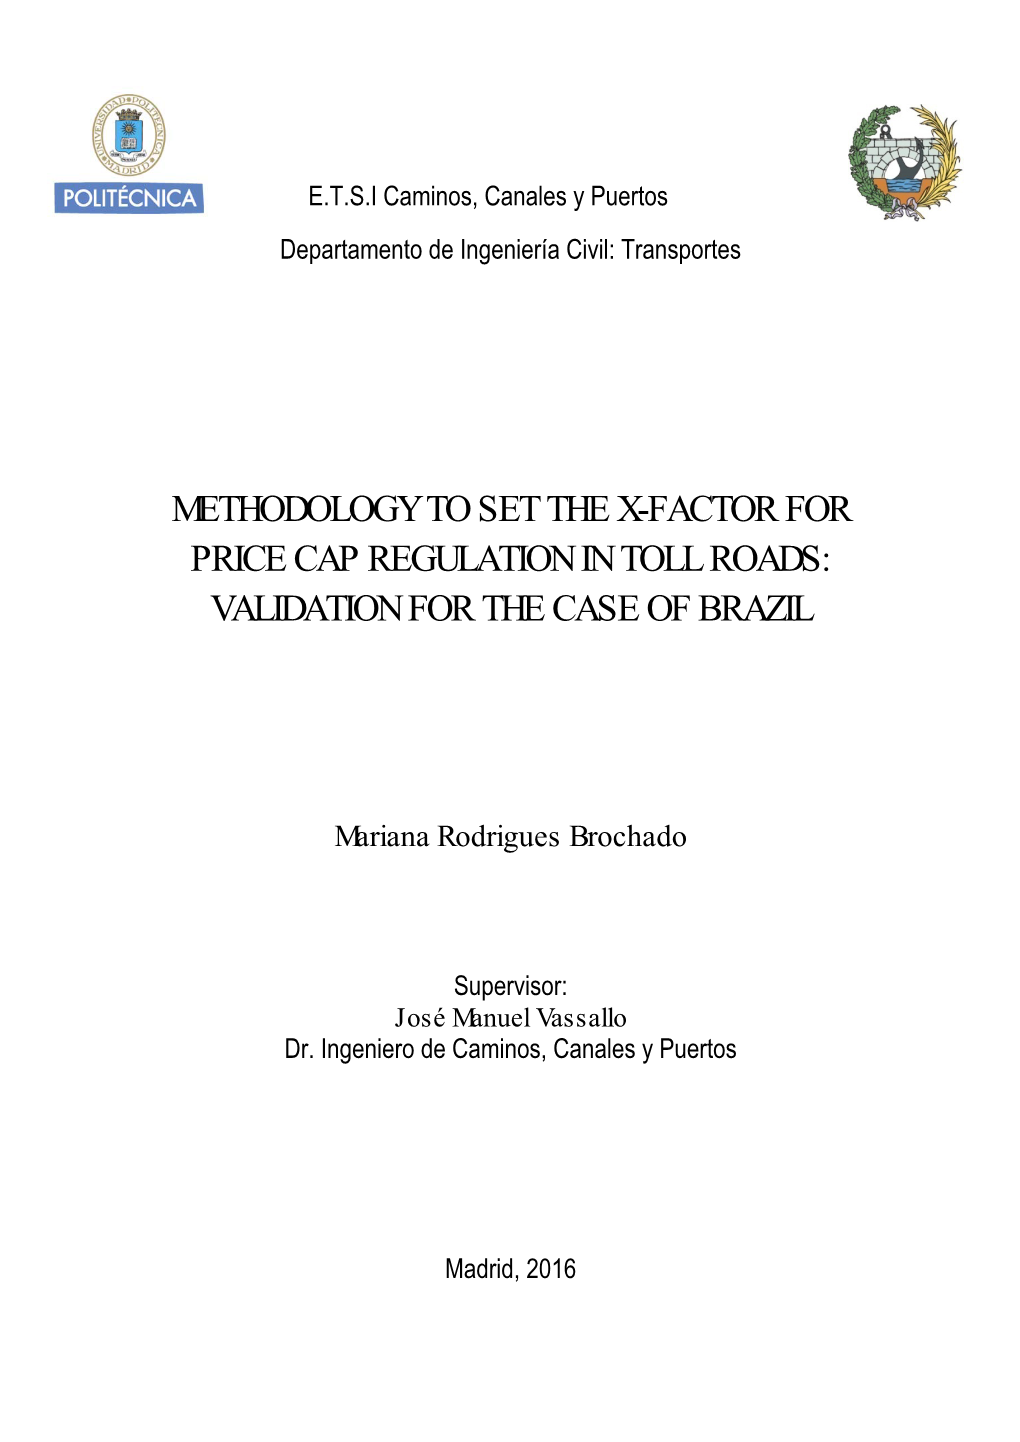 Methodology to Set the X-Factor for Price Cap Regulation in Toll Roads: Validation for the Case of Brazil